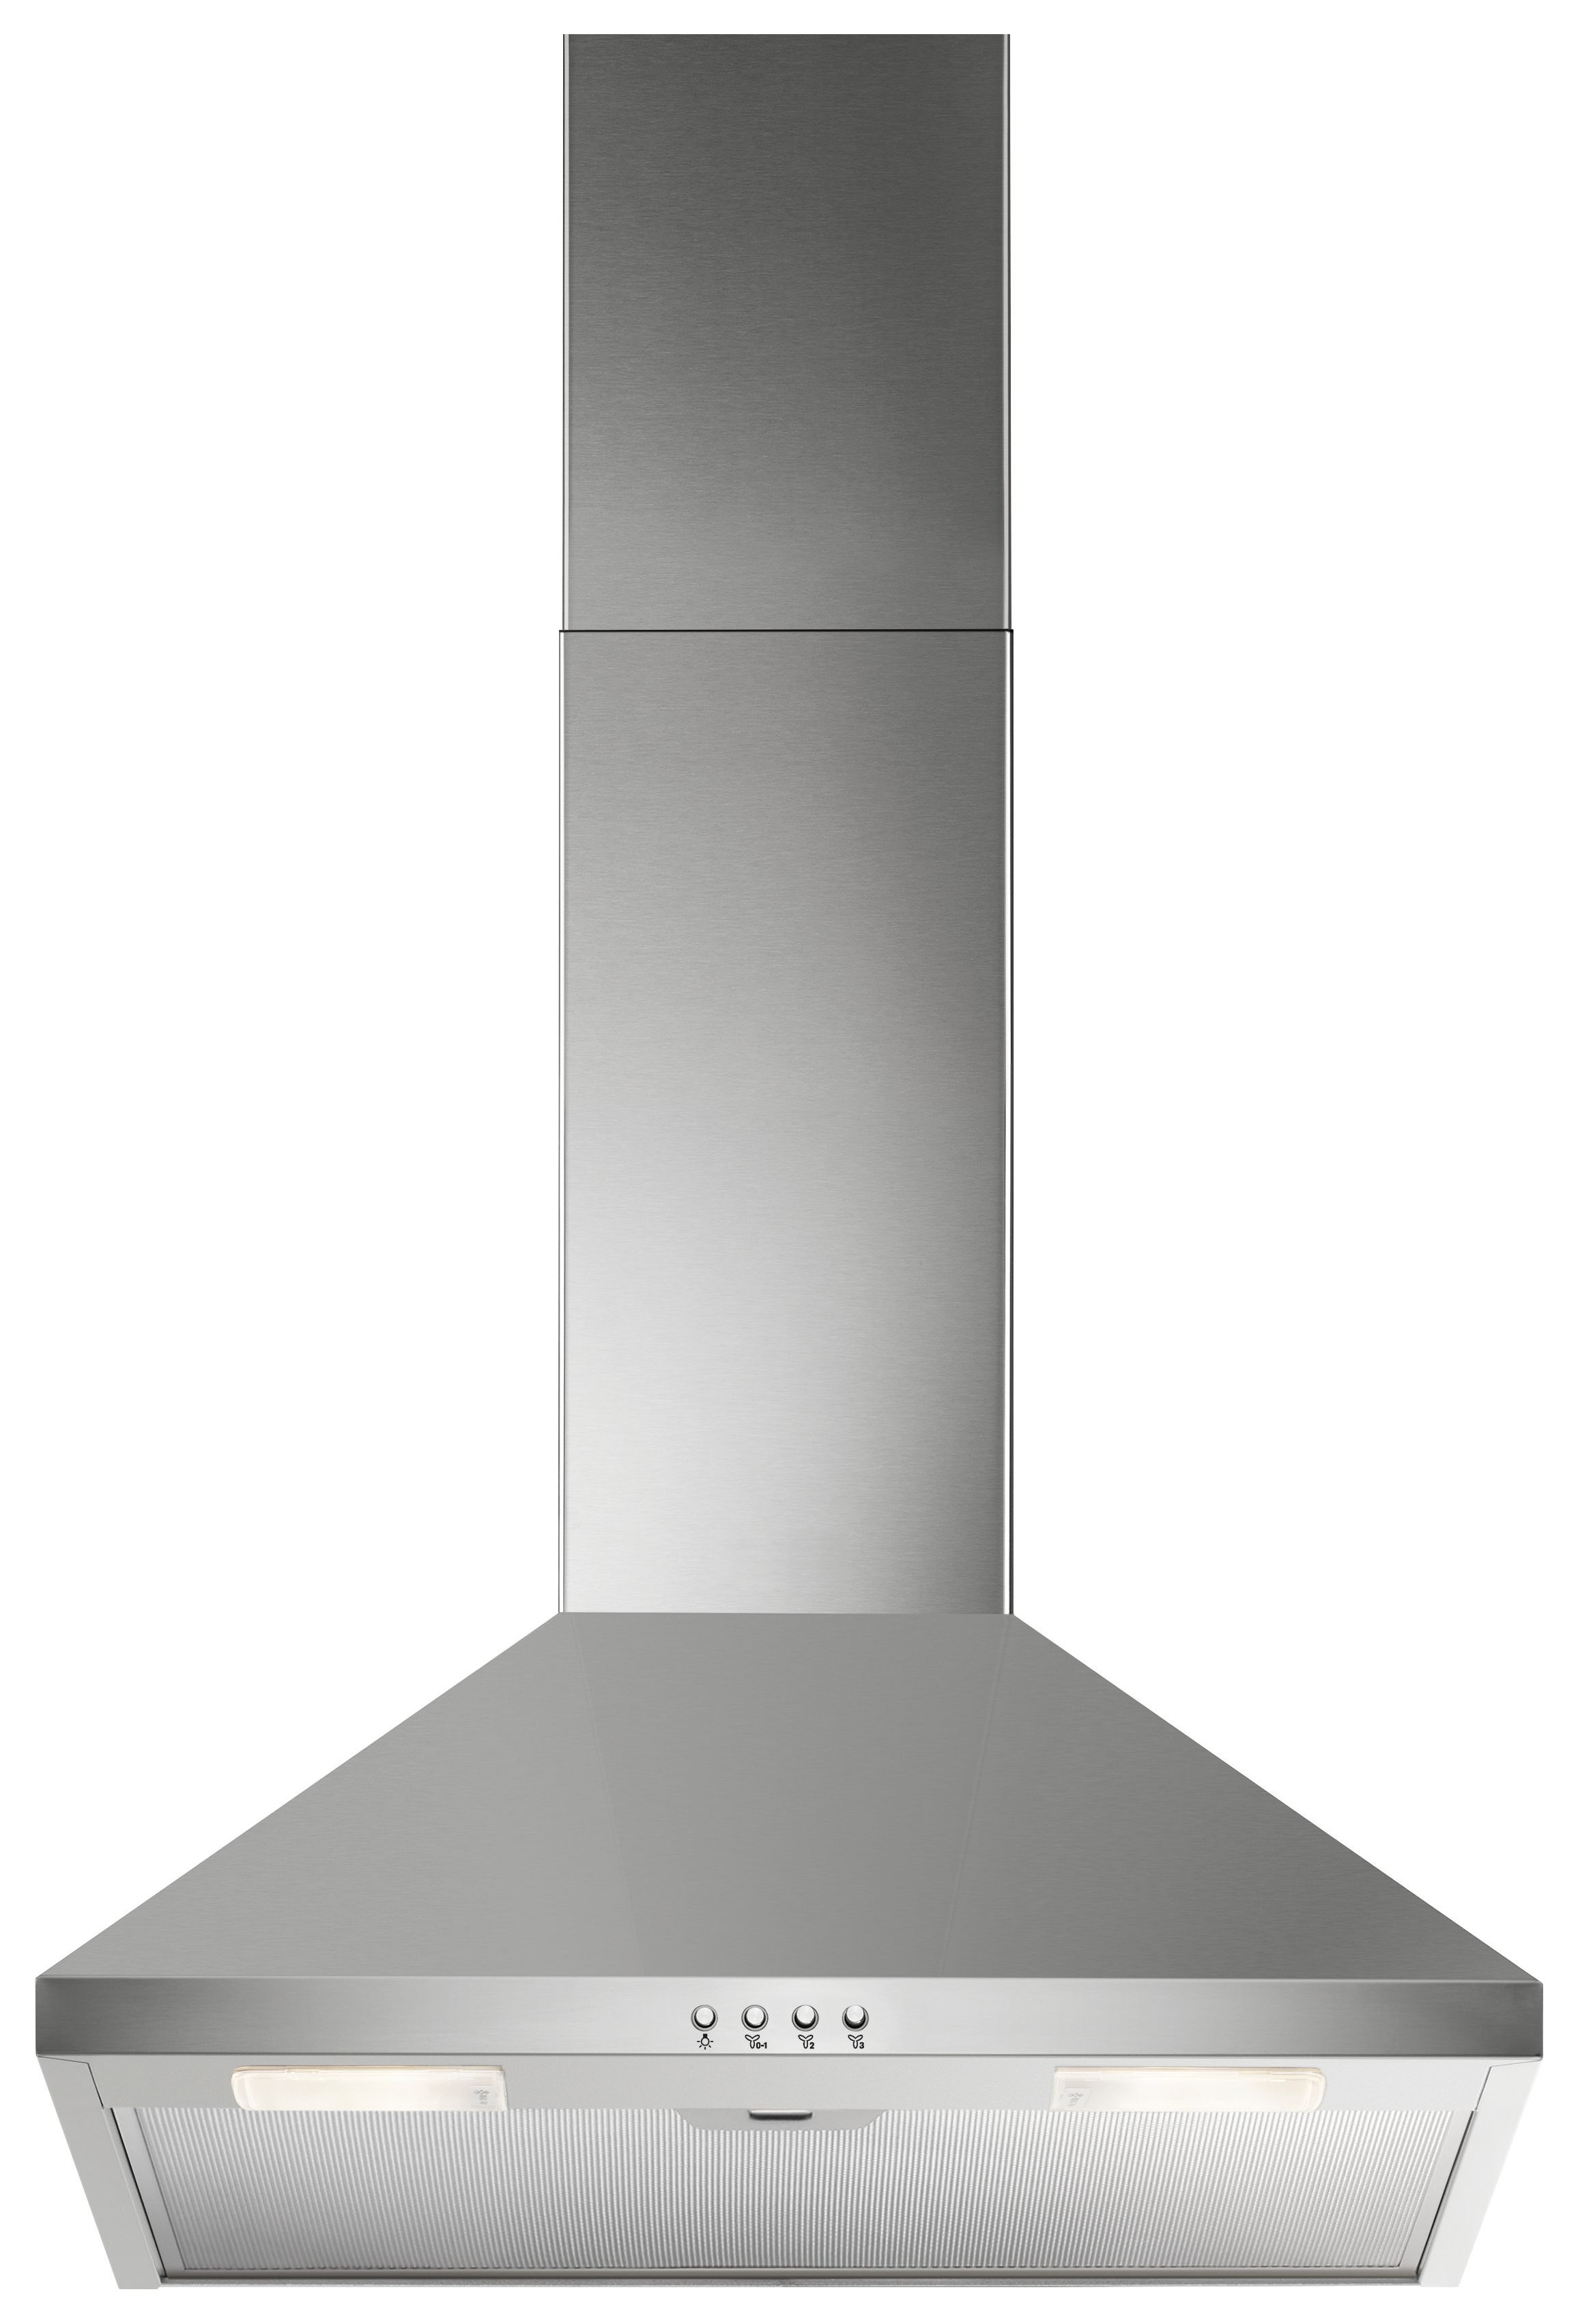 Image of Electrolux 60cm EFC316X Cooker Hood - Stainless Steel